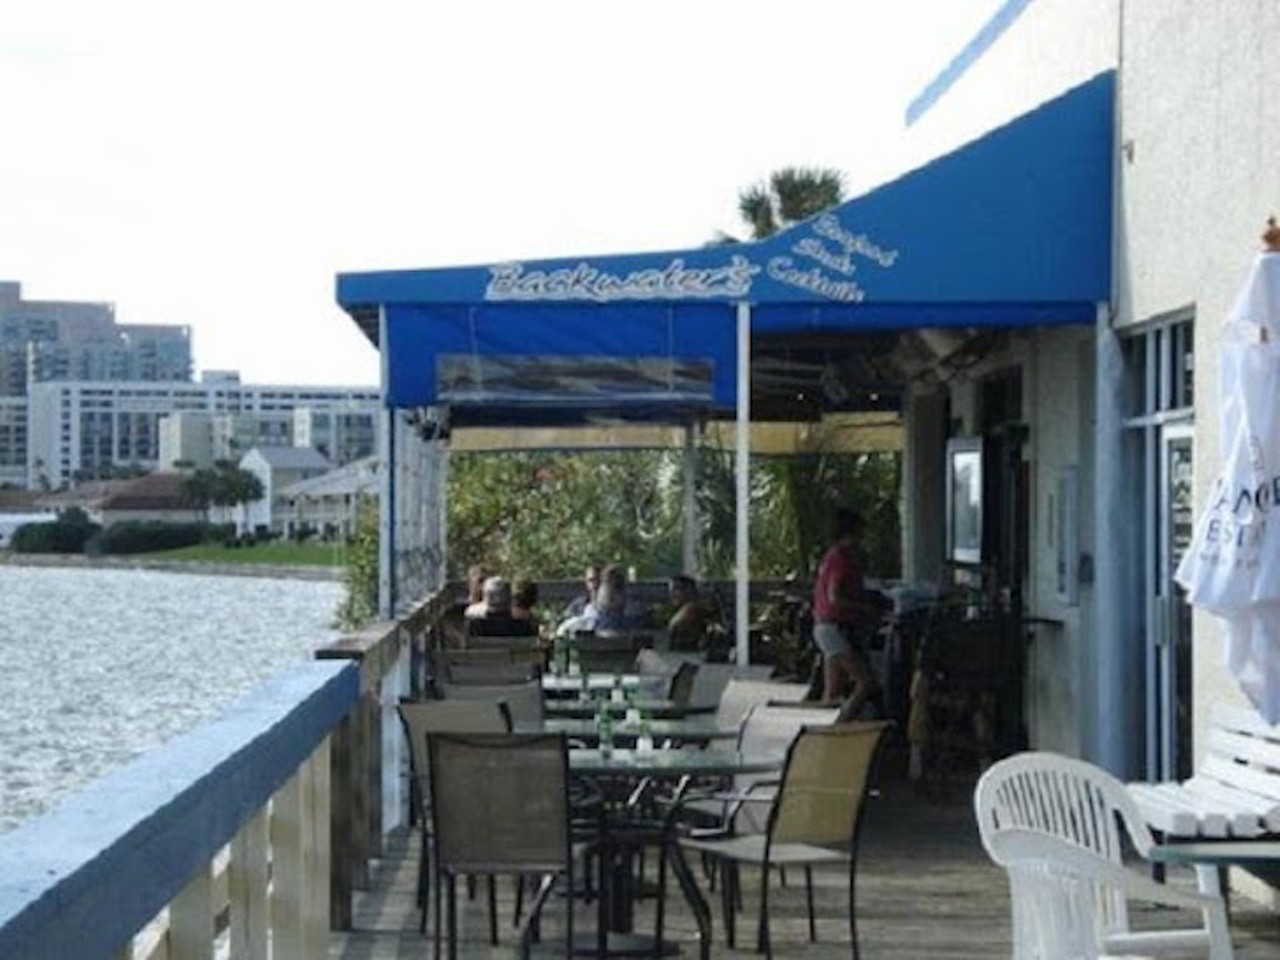 Backwaters
1261 Gulf Blvd. Clearwater, FL
Available from 2-6:30 p.m. Backwaters offers their happy hour specials, which includes 6 for $6 oysters, jumbo shrimp, 6 for $5 and a dip trio for $9. They&#146;ve also got glasses of wine for $3.95, select bottle of beer for $2.95 or a pint for $2.50. 
Photo via Google Maps